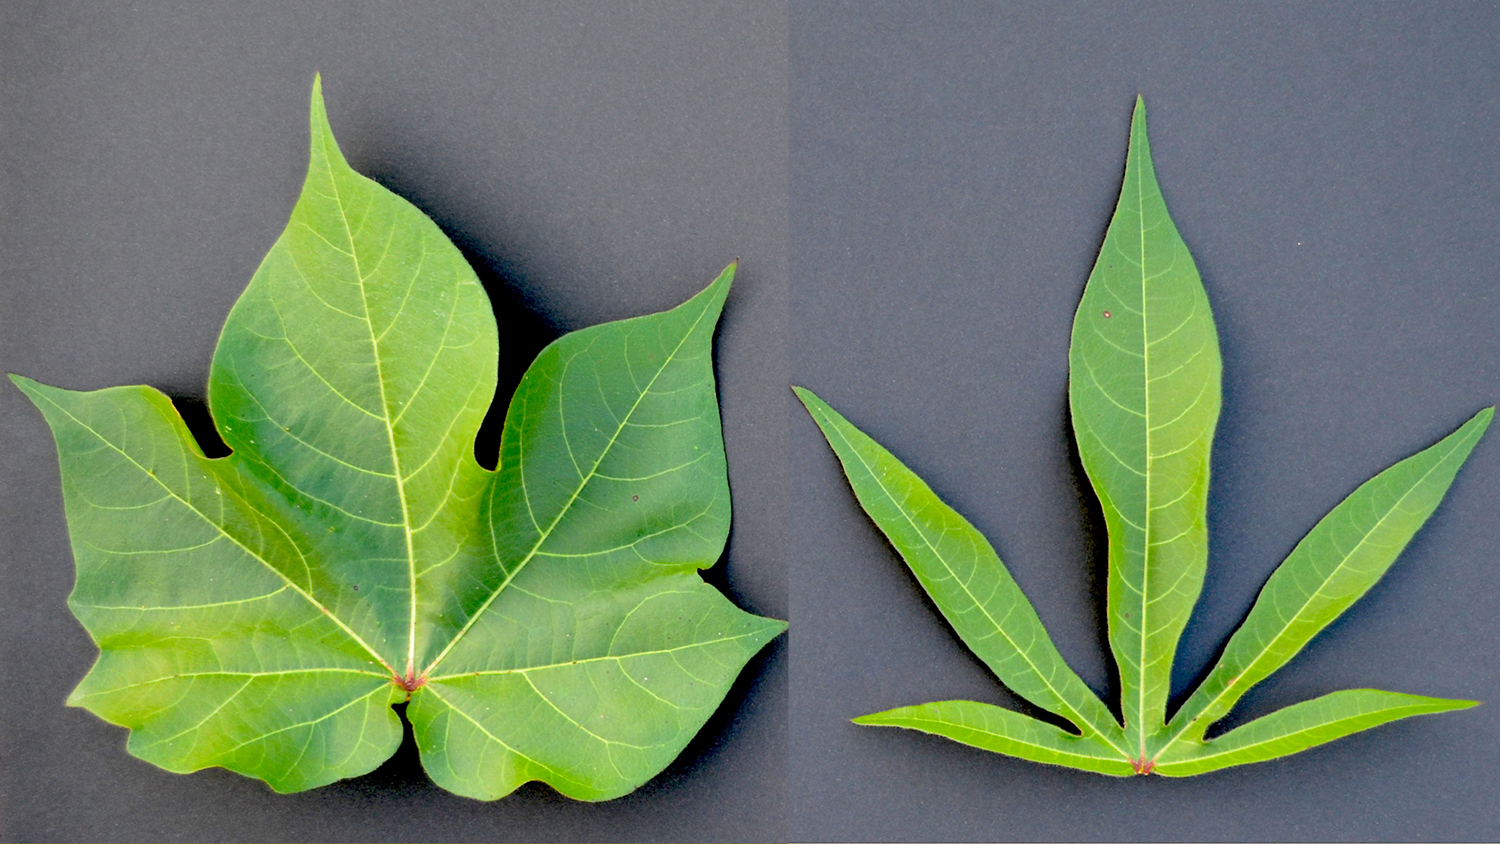 A broad normal cotton leaf compared to an okra-shaped cotton leaf.